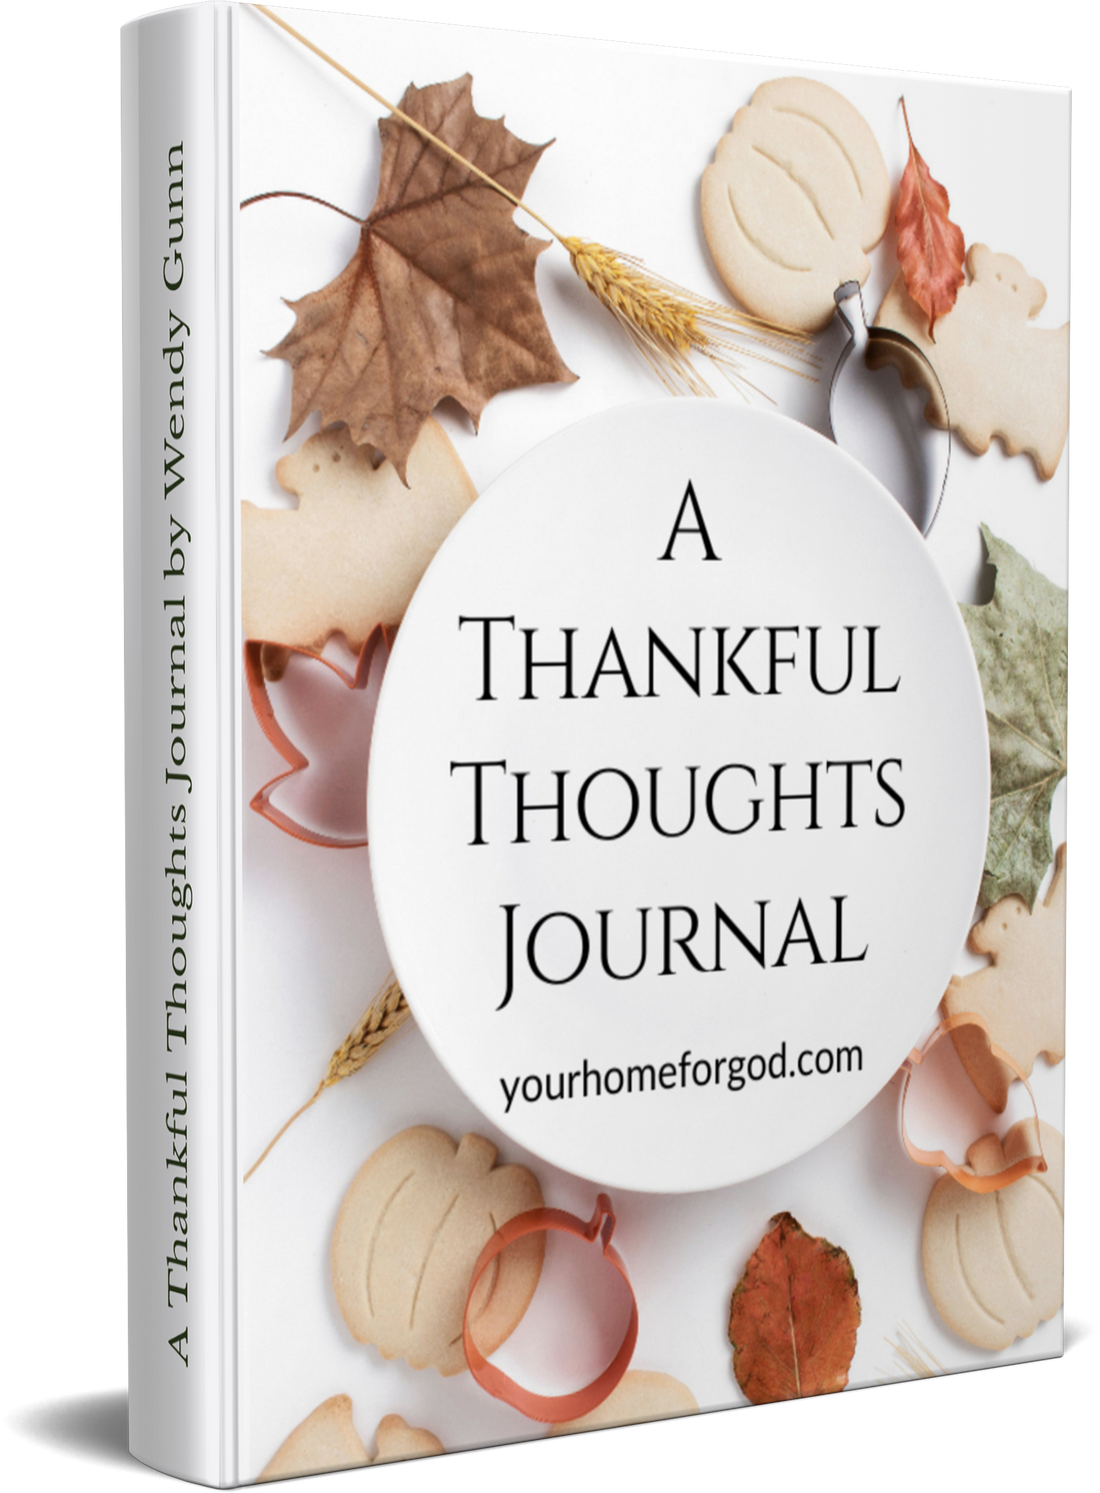 A Thankful Thoughts Journal